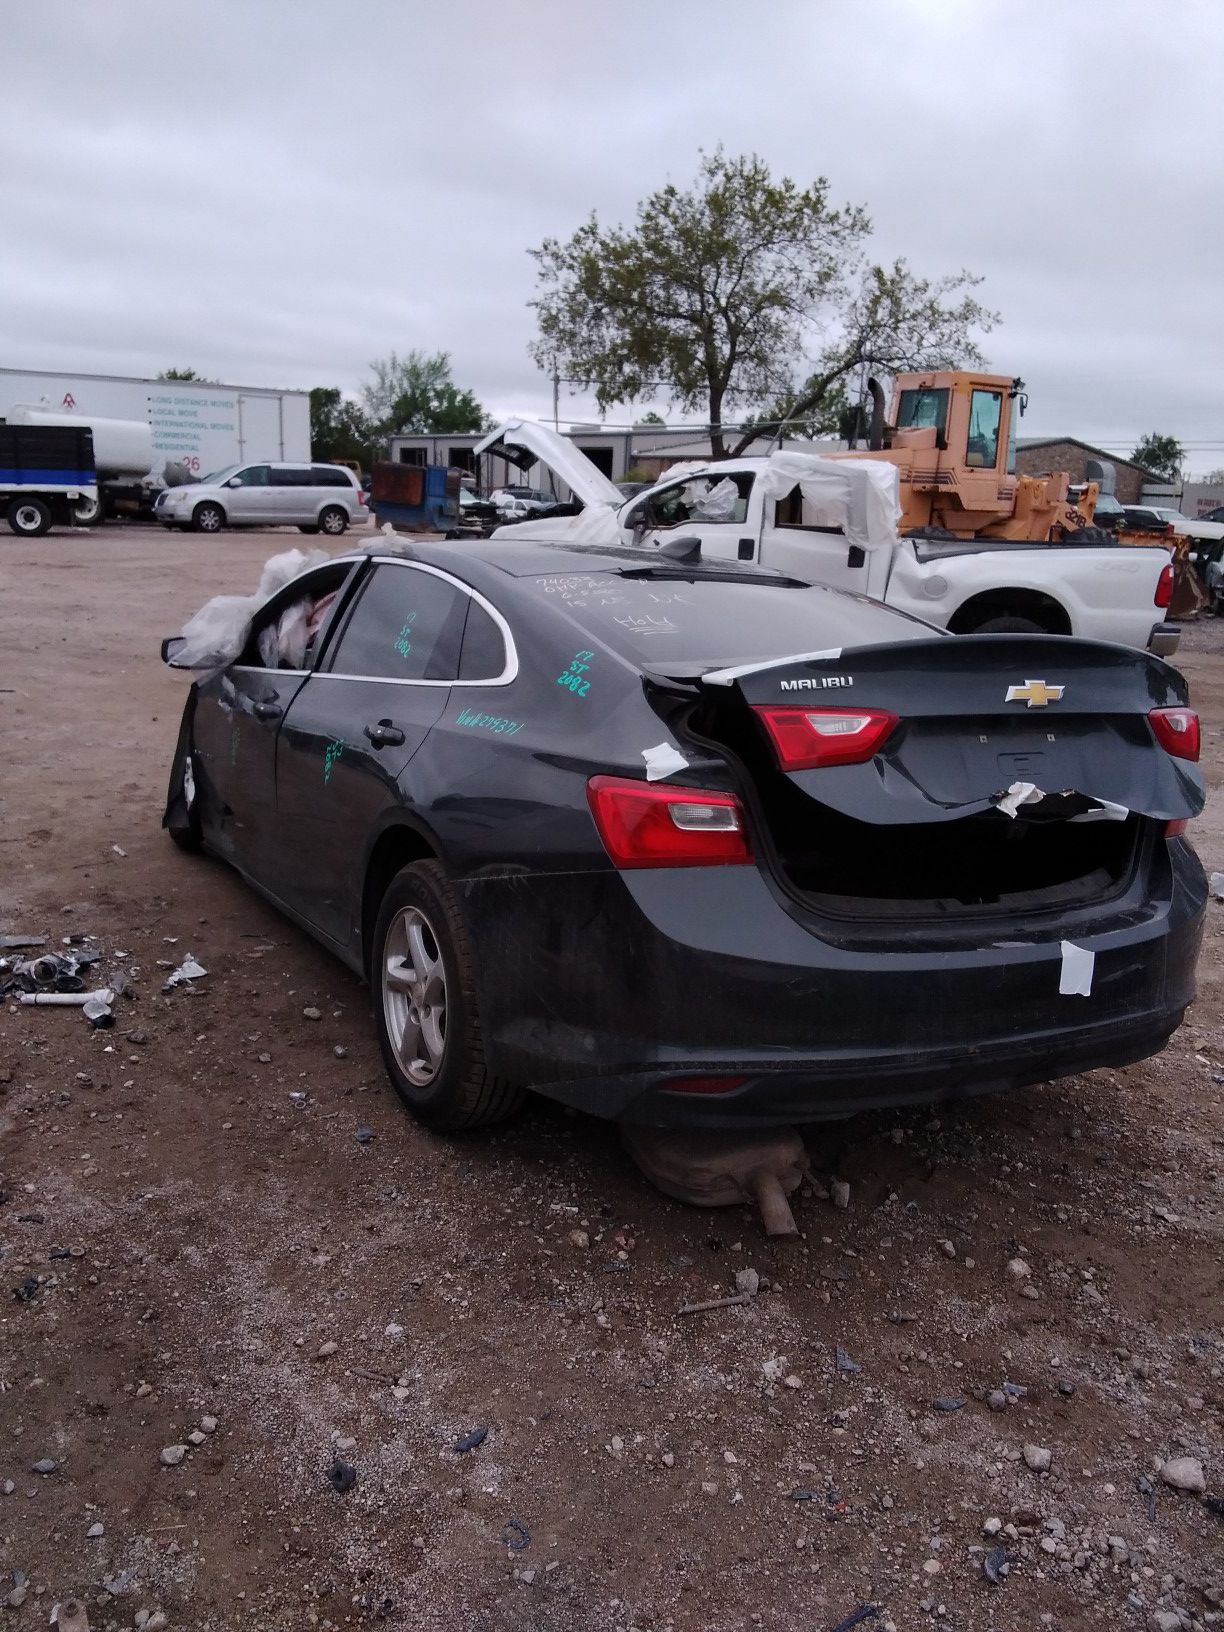 2017 Chevy Malibu for parts